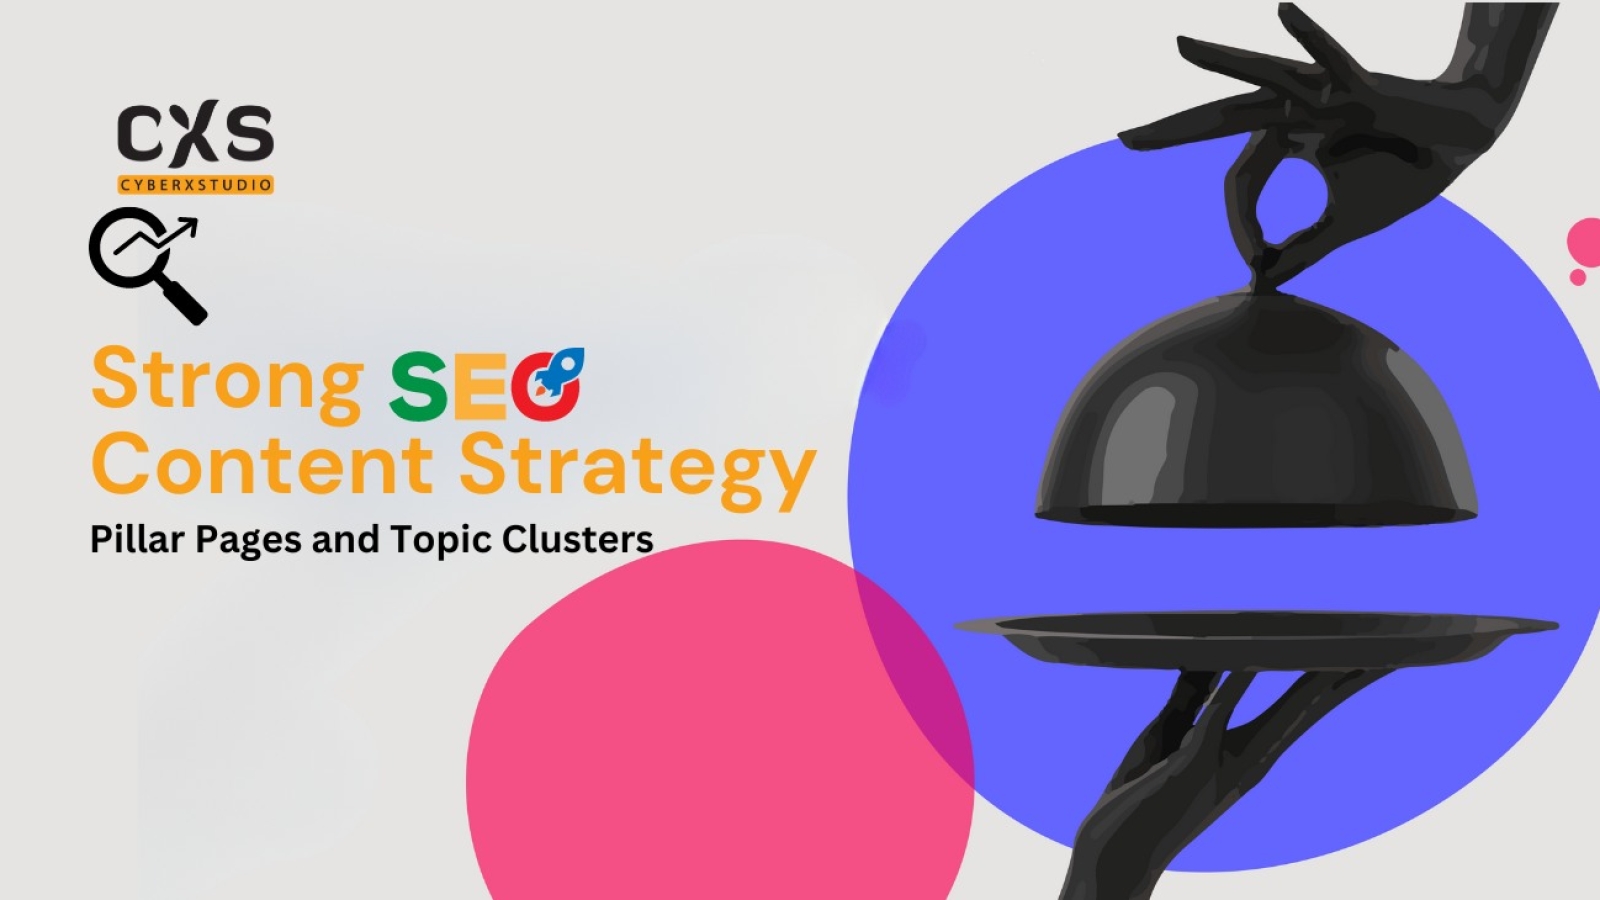 Strong SEO Content Strategy Pillar Pages and Topic Clusters